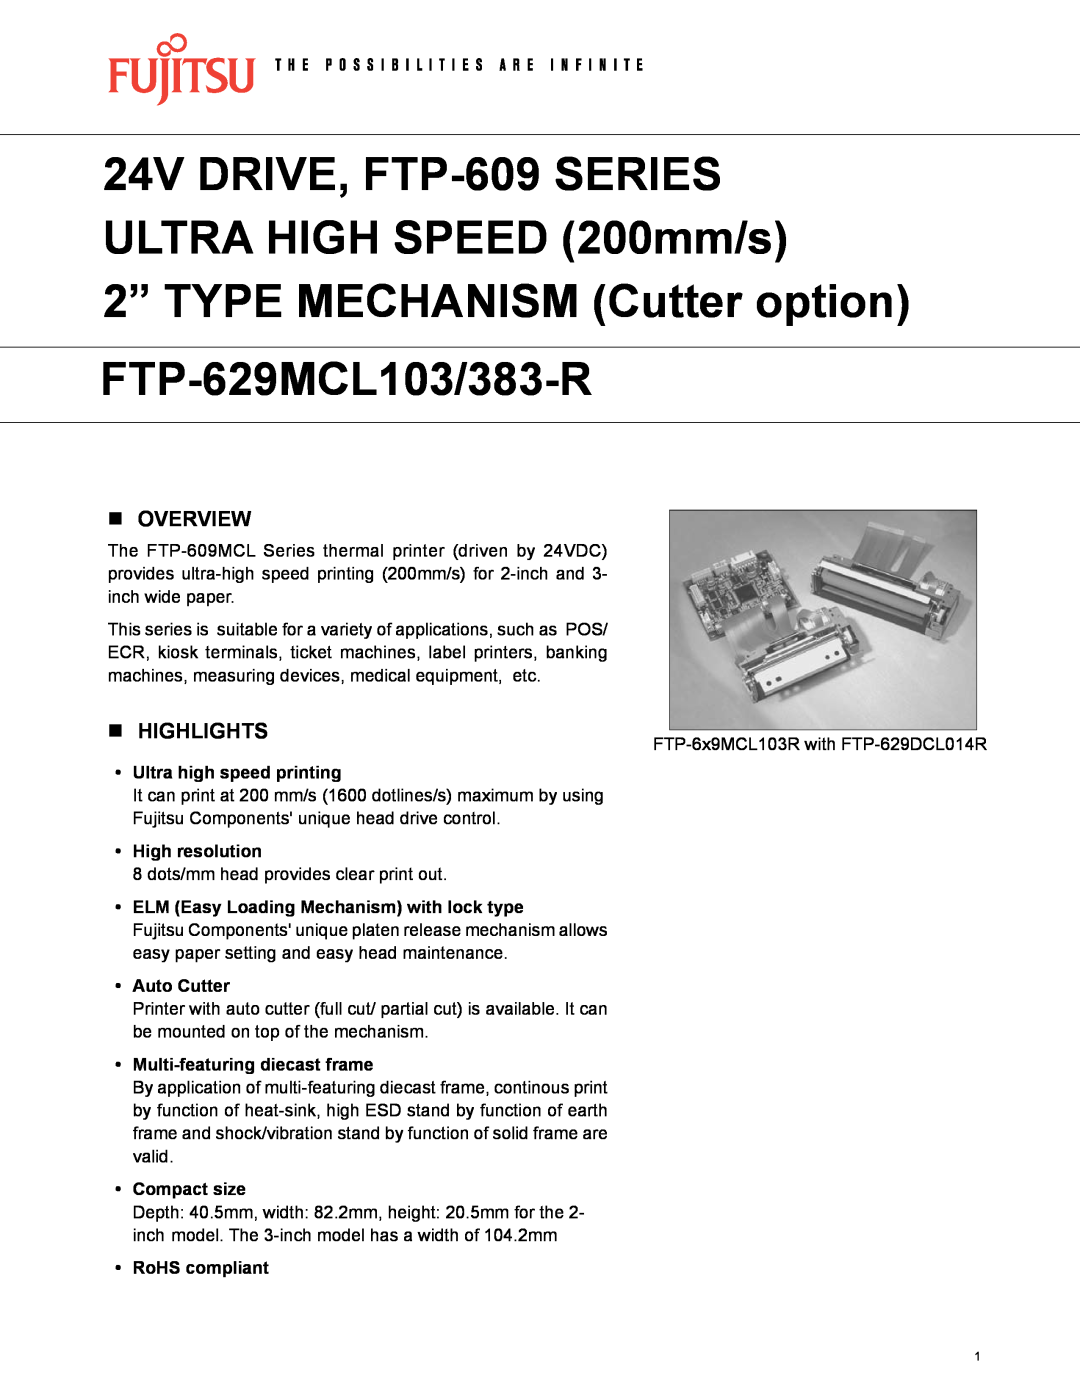 Fujitsu FTP-629MCL103-R manual 24V DRIVE, FTP-609 Series Ultra high speed 200mm/s, n Overview, n highlights, Auto Cutter 